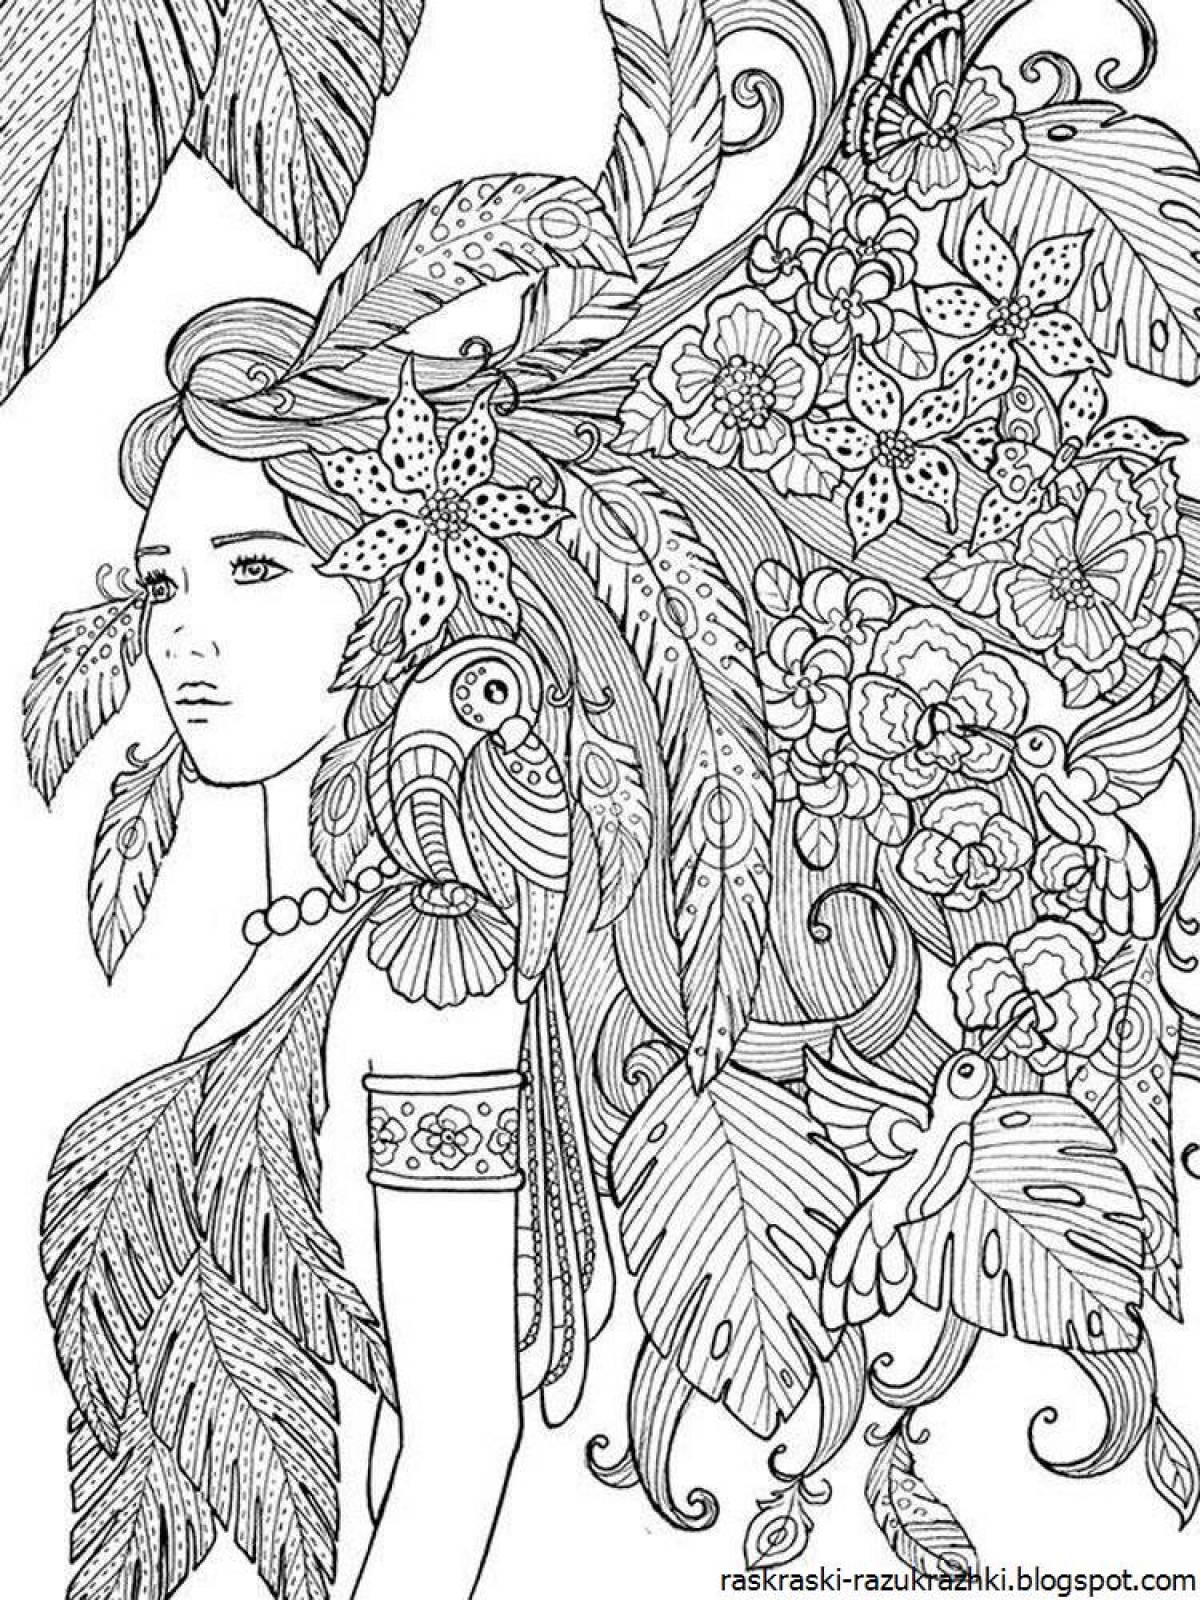 Amazing coloring book for all adults